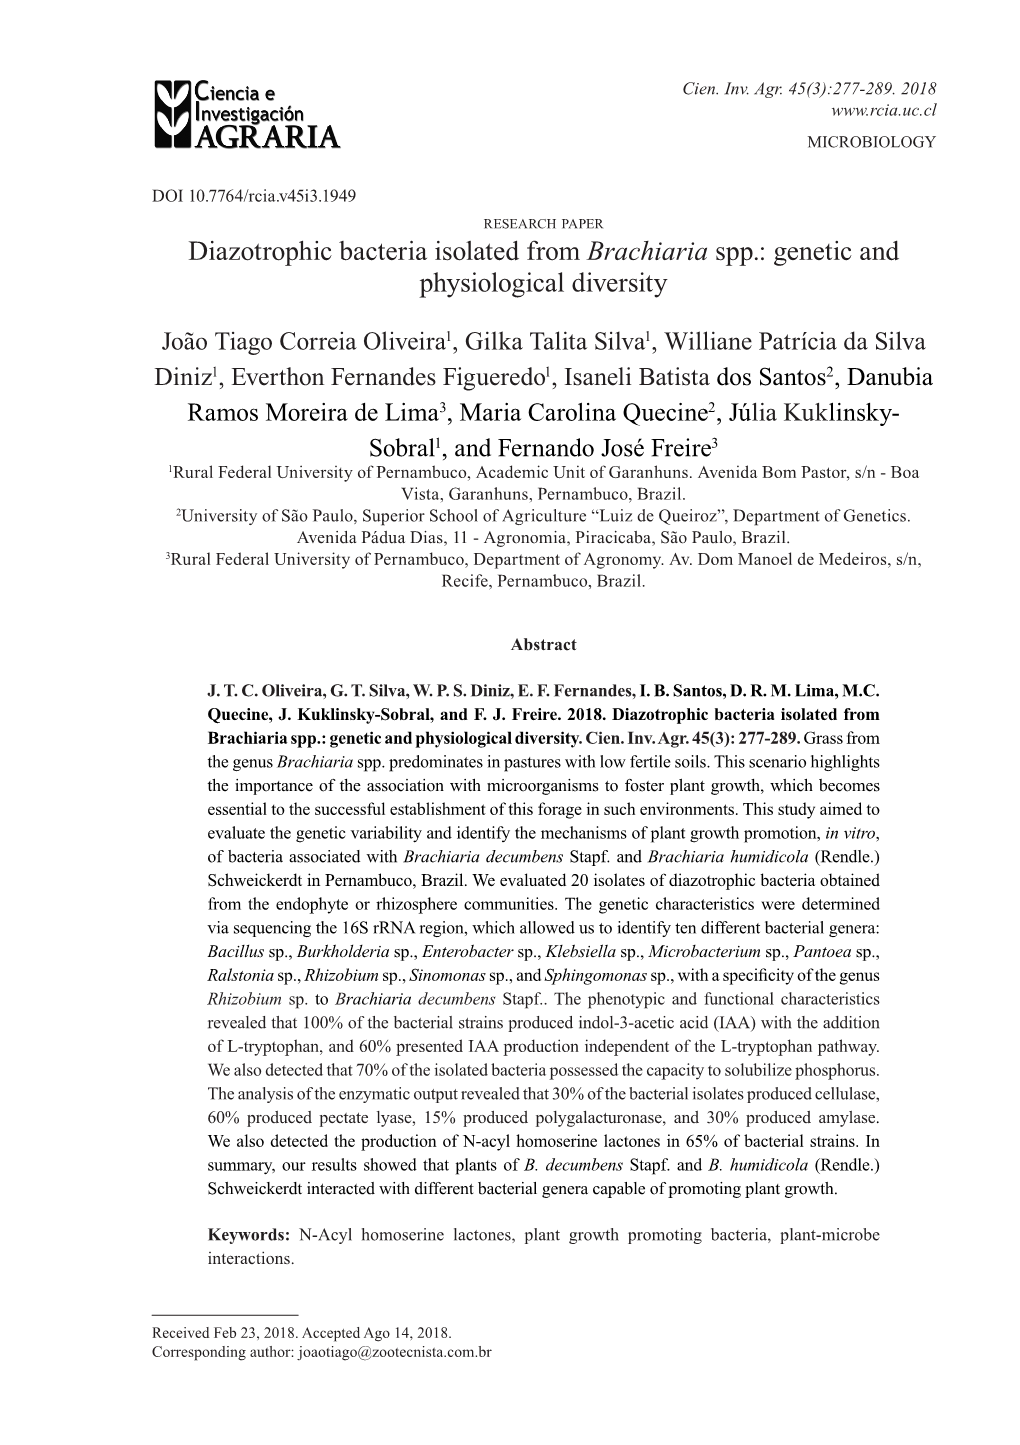 Diazotrophic Bacteria Isolated from Brachiaria Spp.: Genetic and Physiological Diversity